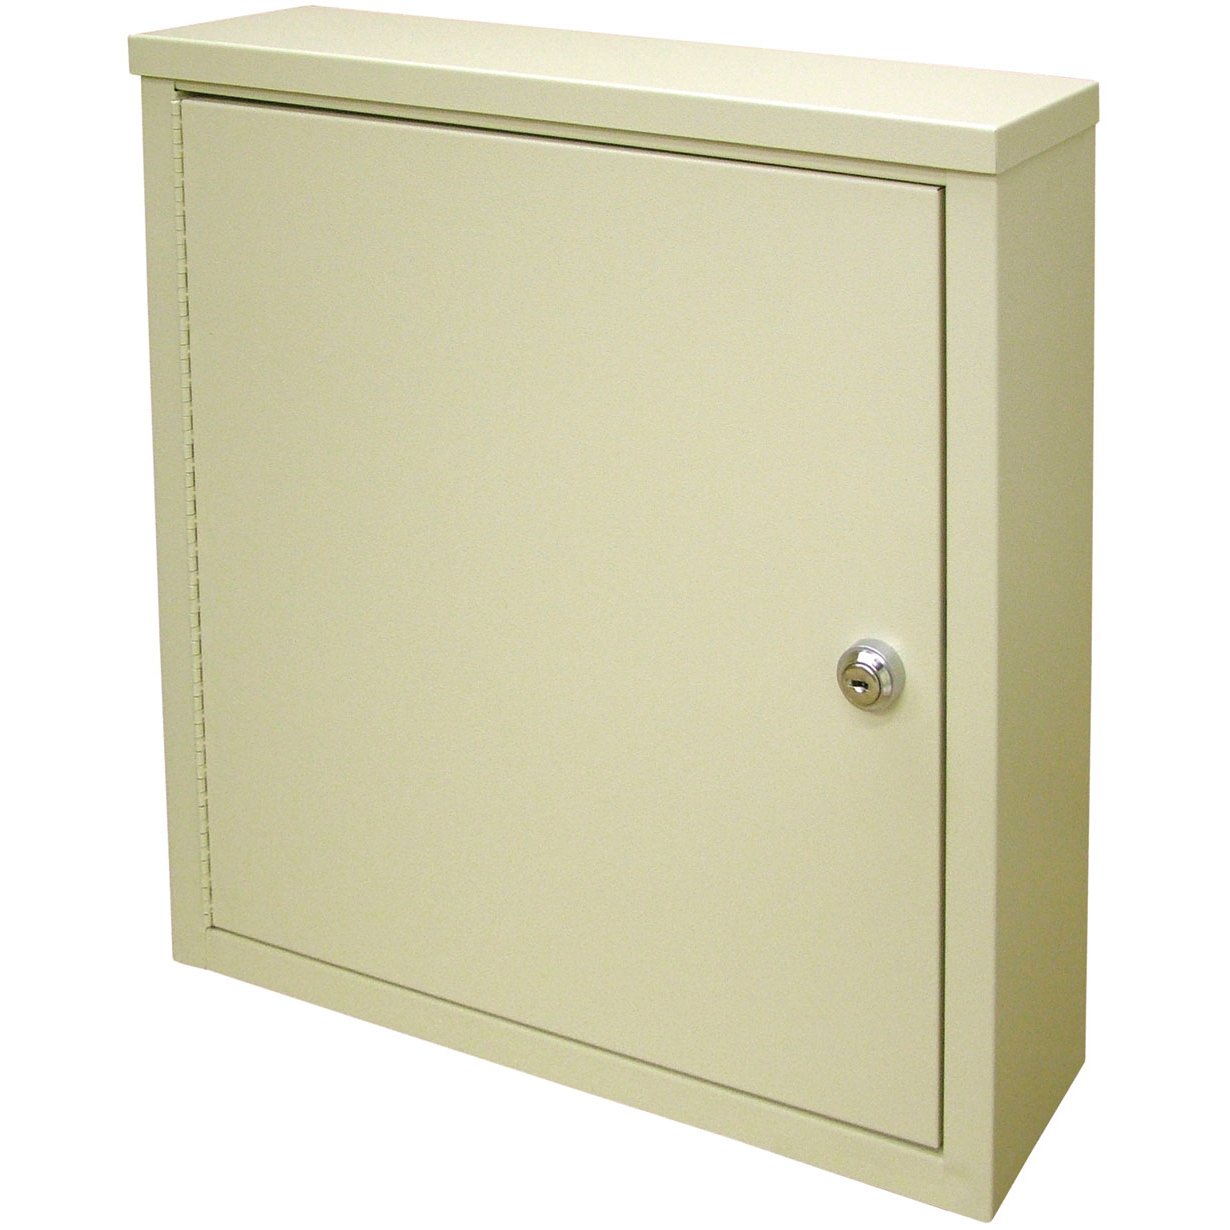 OmniMed Small Wall Storage Cabinets 16.75 H x 16 W x 4 D